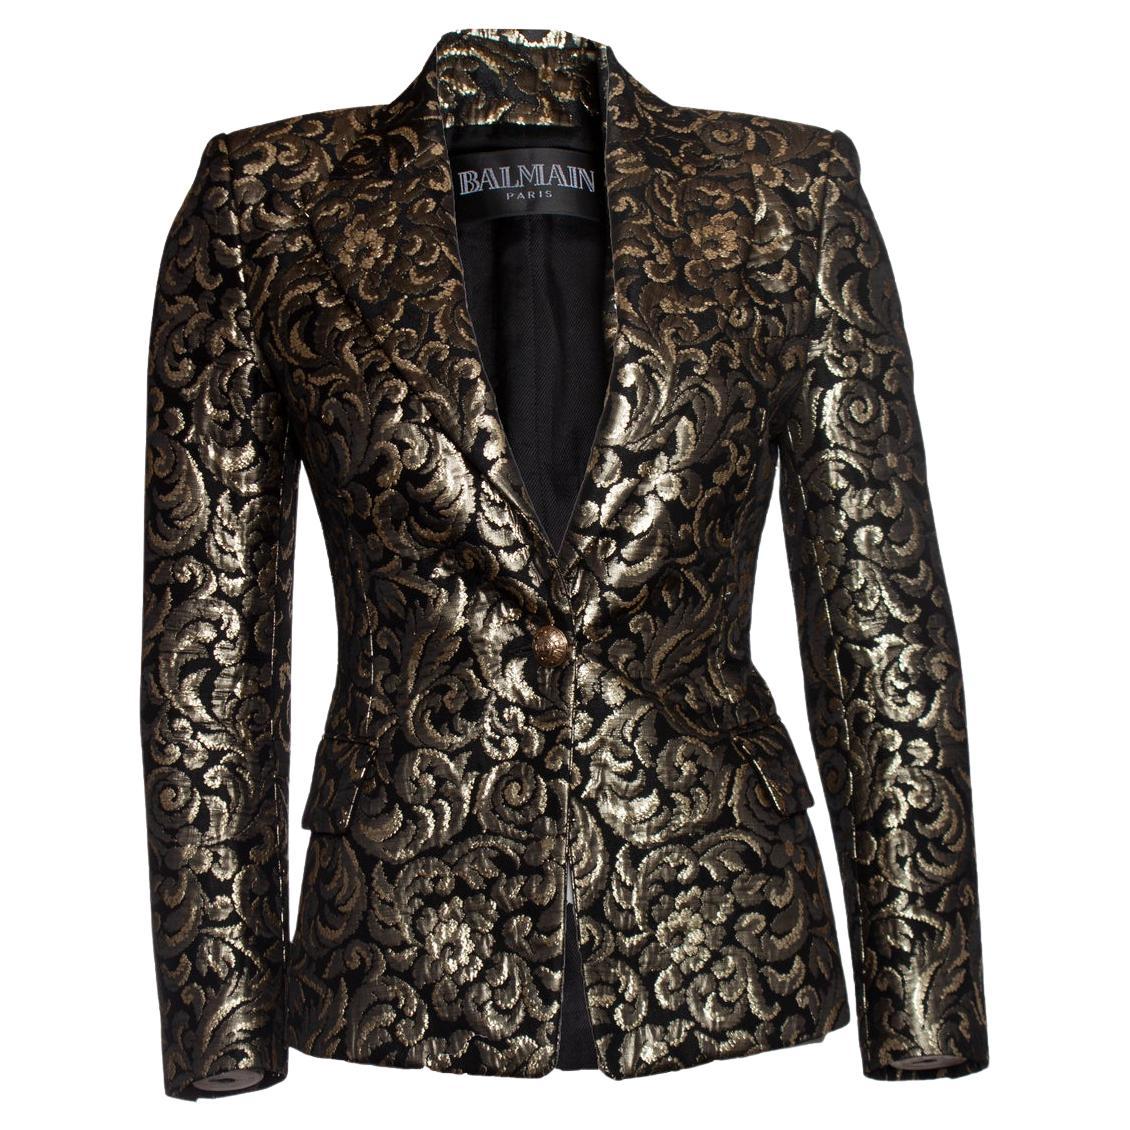 Balmain, jacquard woven blazer in black and gold For Sale